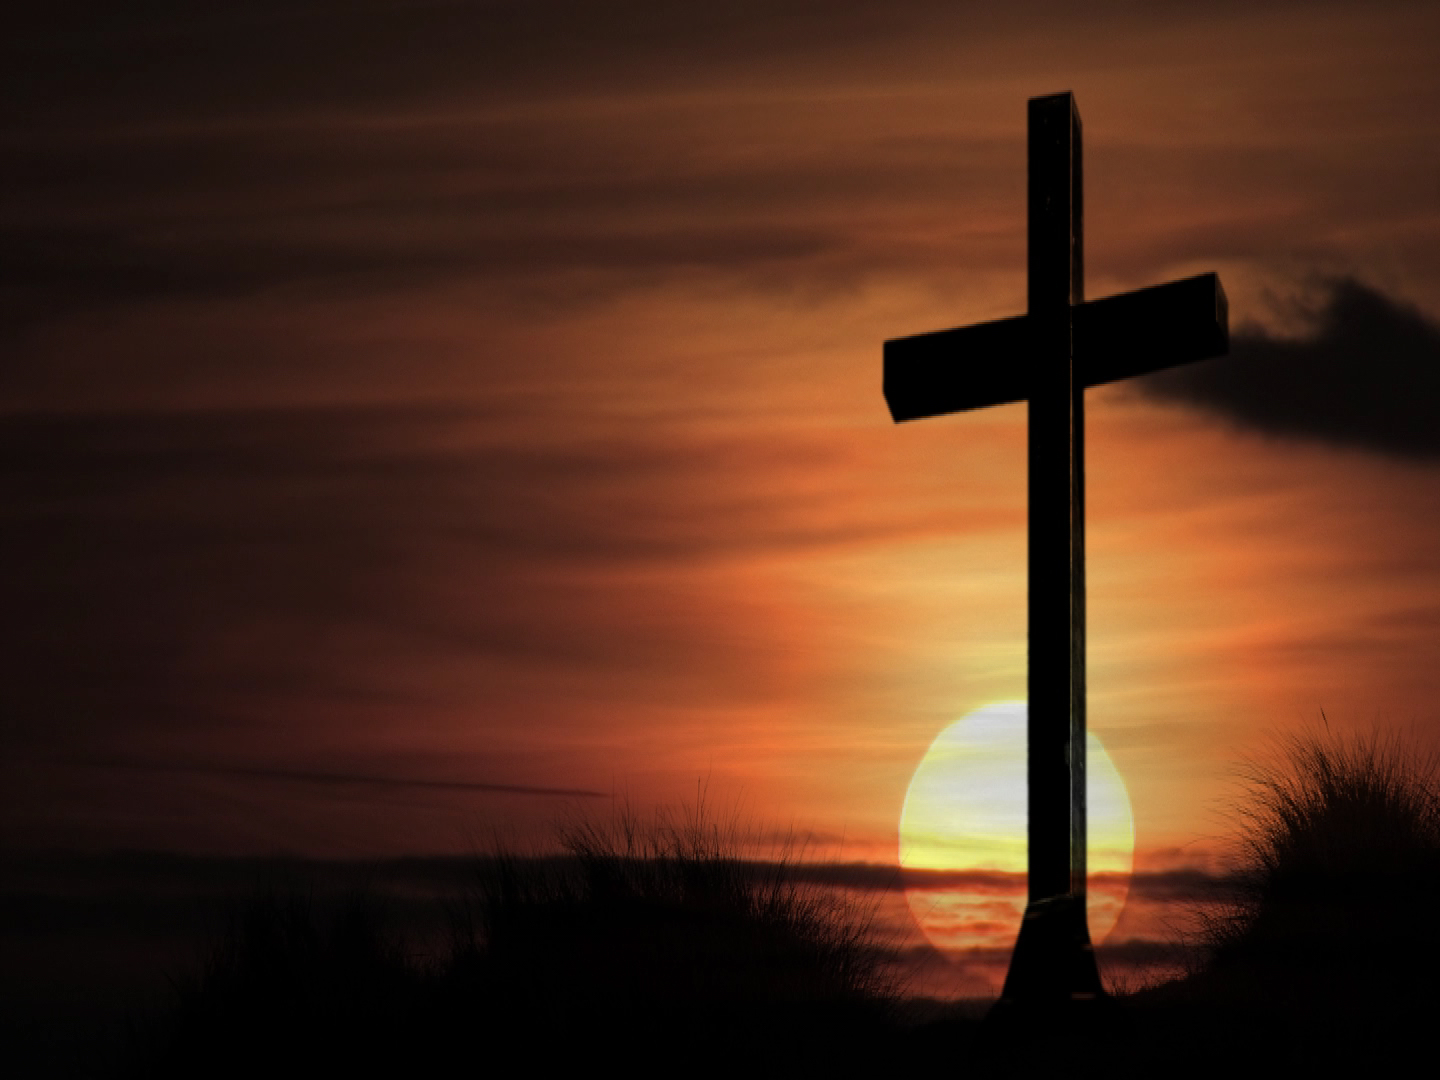  Cross On Sunset Wallpaper   Christian Wallpapers and Backgrounds